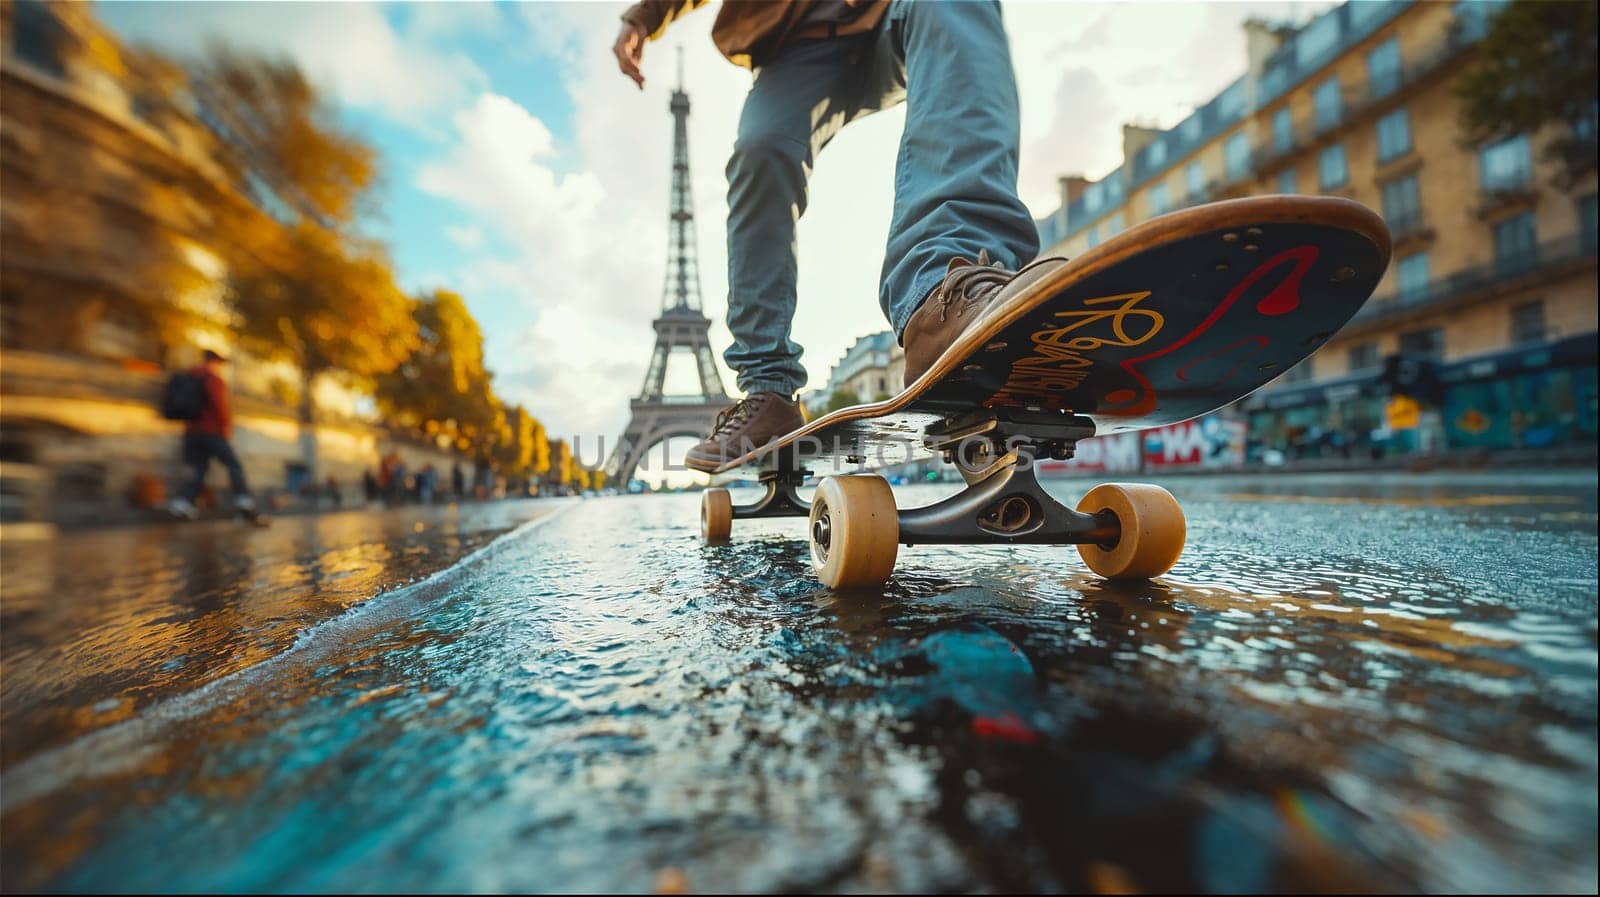 A skateboarder executes a stylish trick with the Eiffel Tower in the background